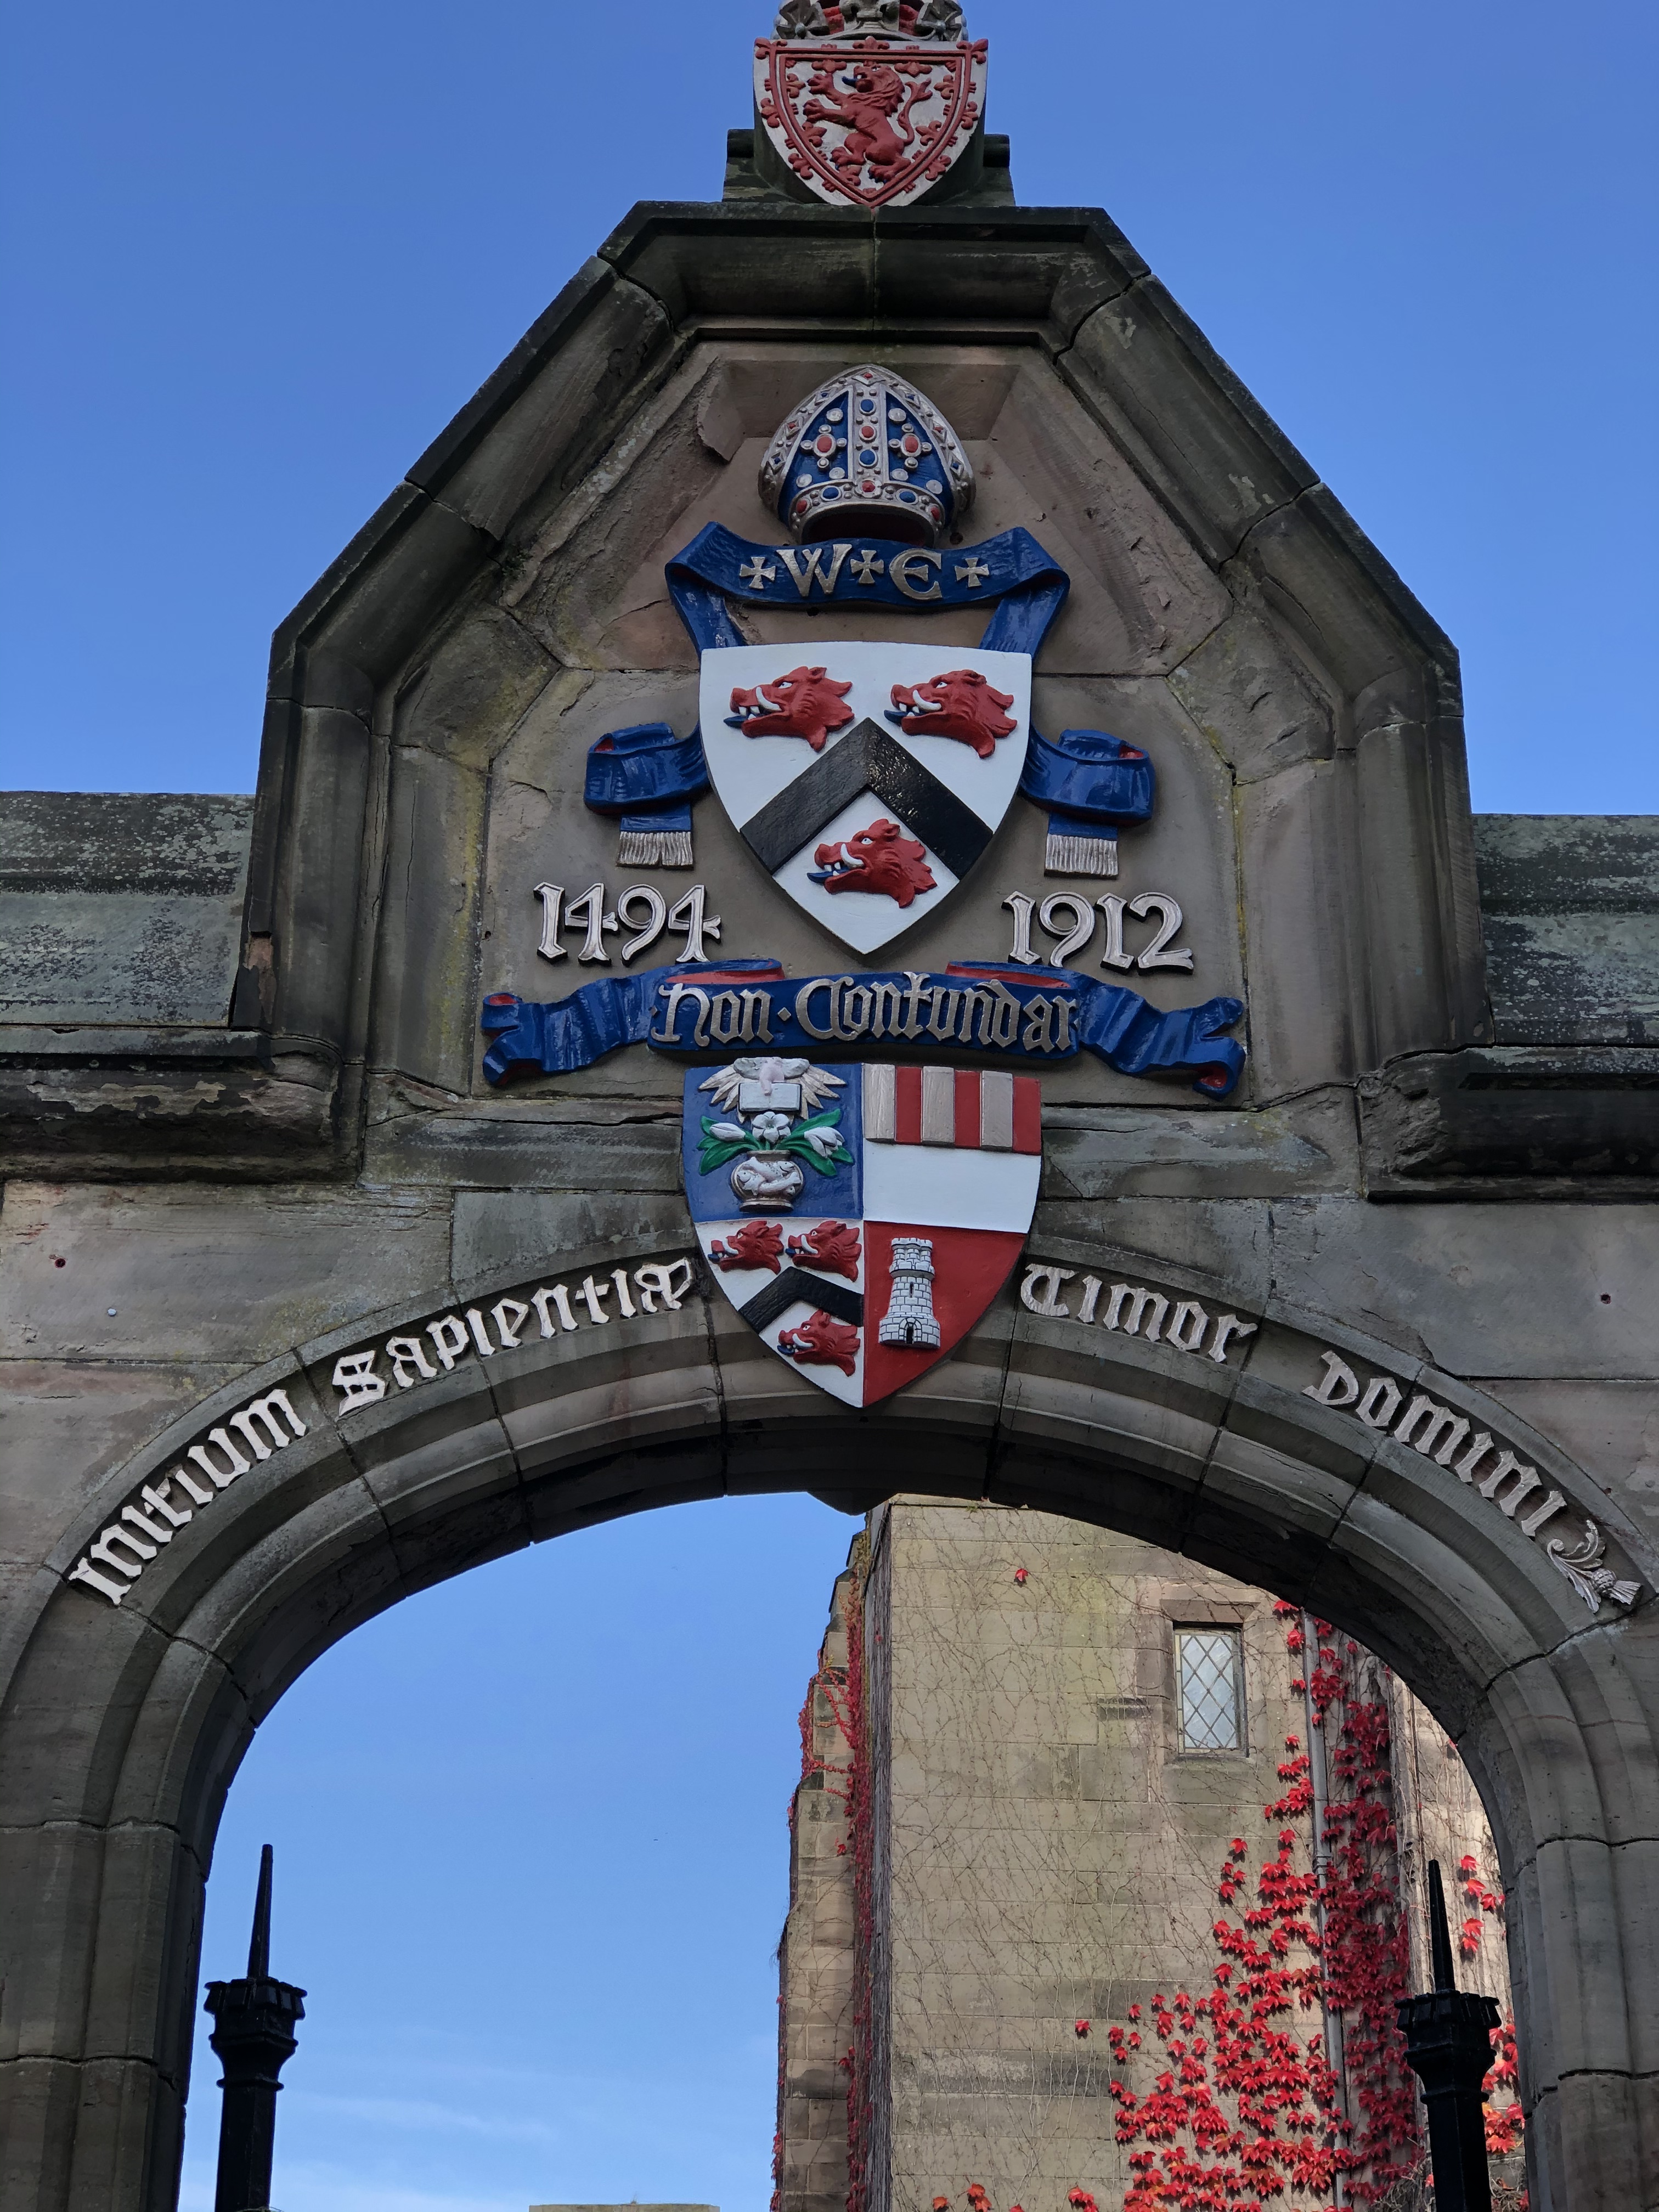 Archway at the university of Aberdeen, beating the university crest and logo